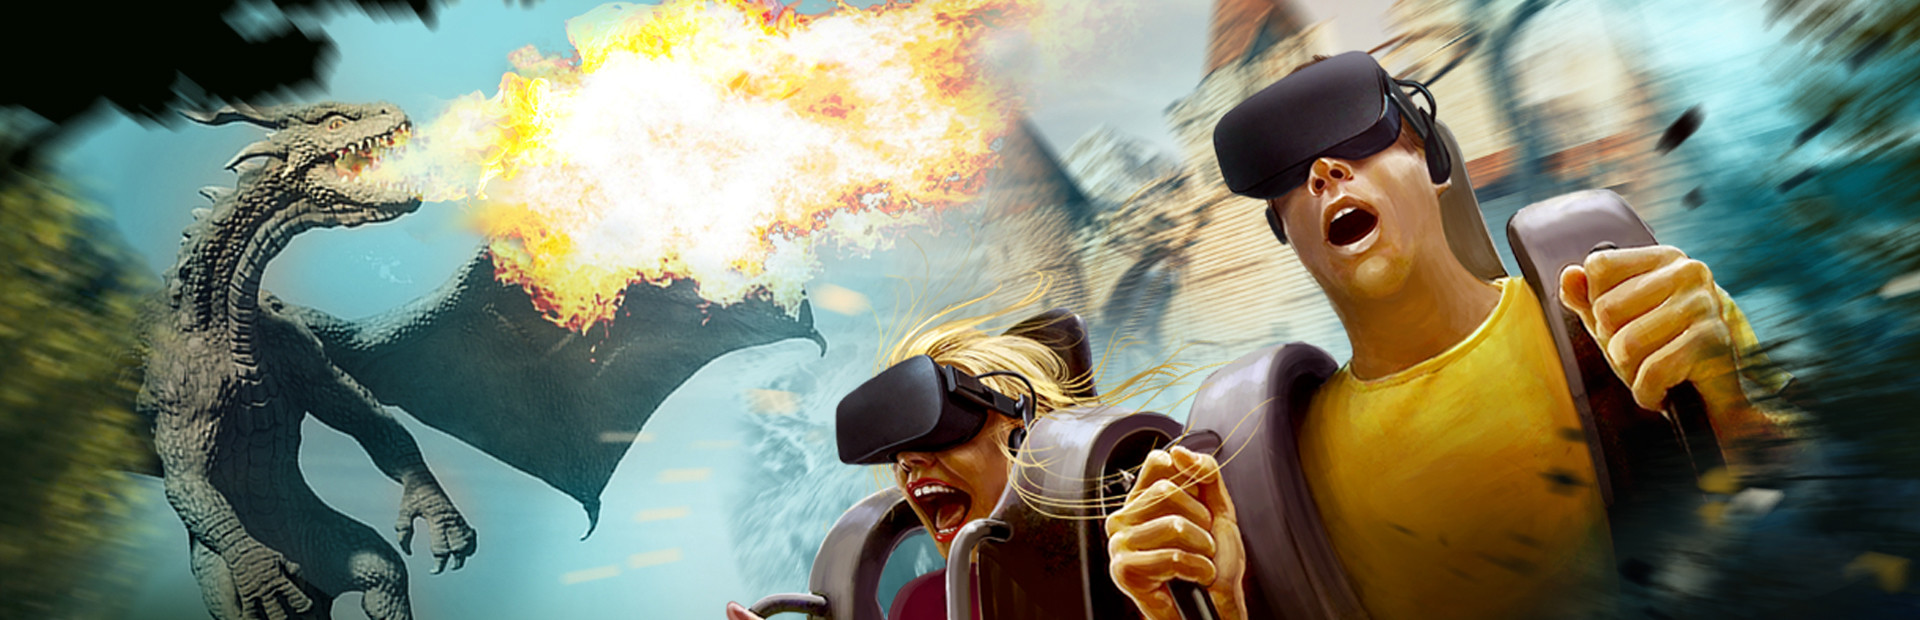 Rift Coaster HD Remastered VR cover image